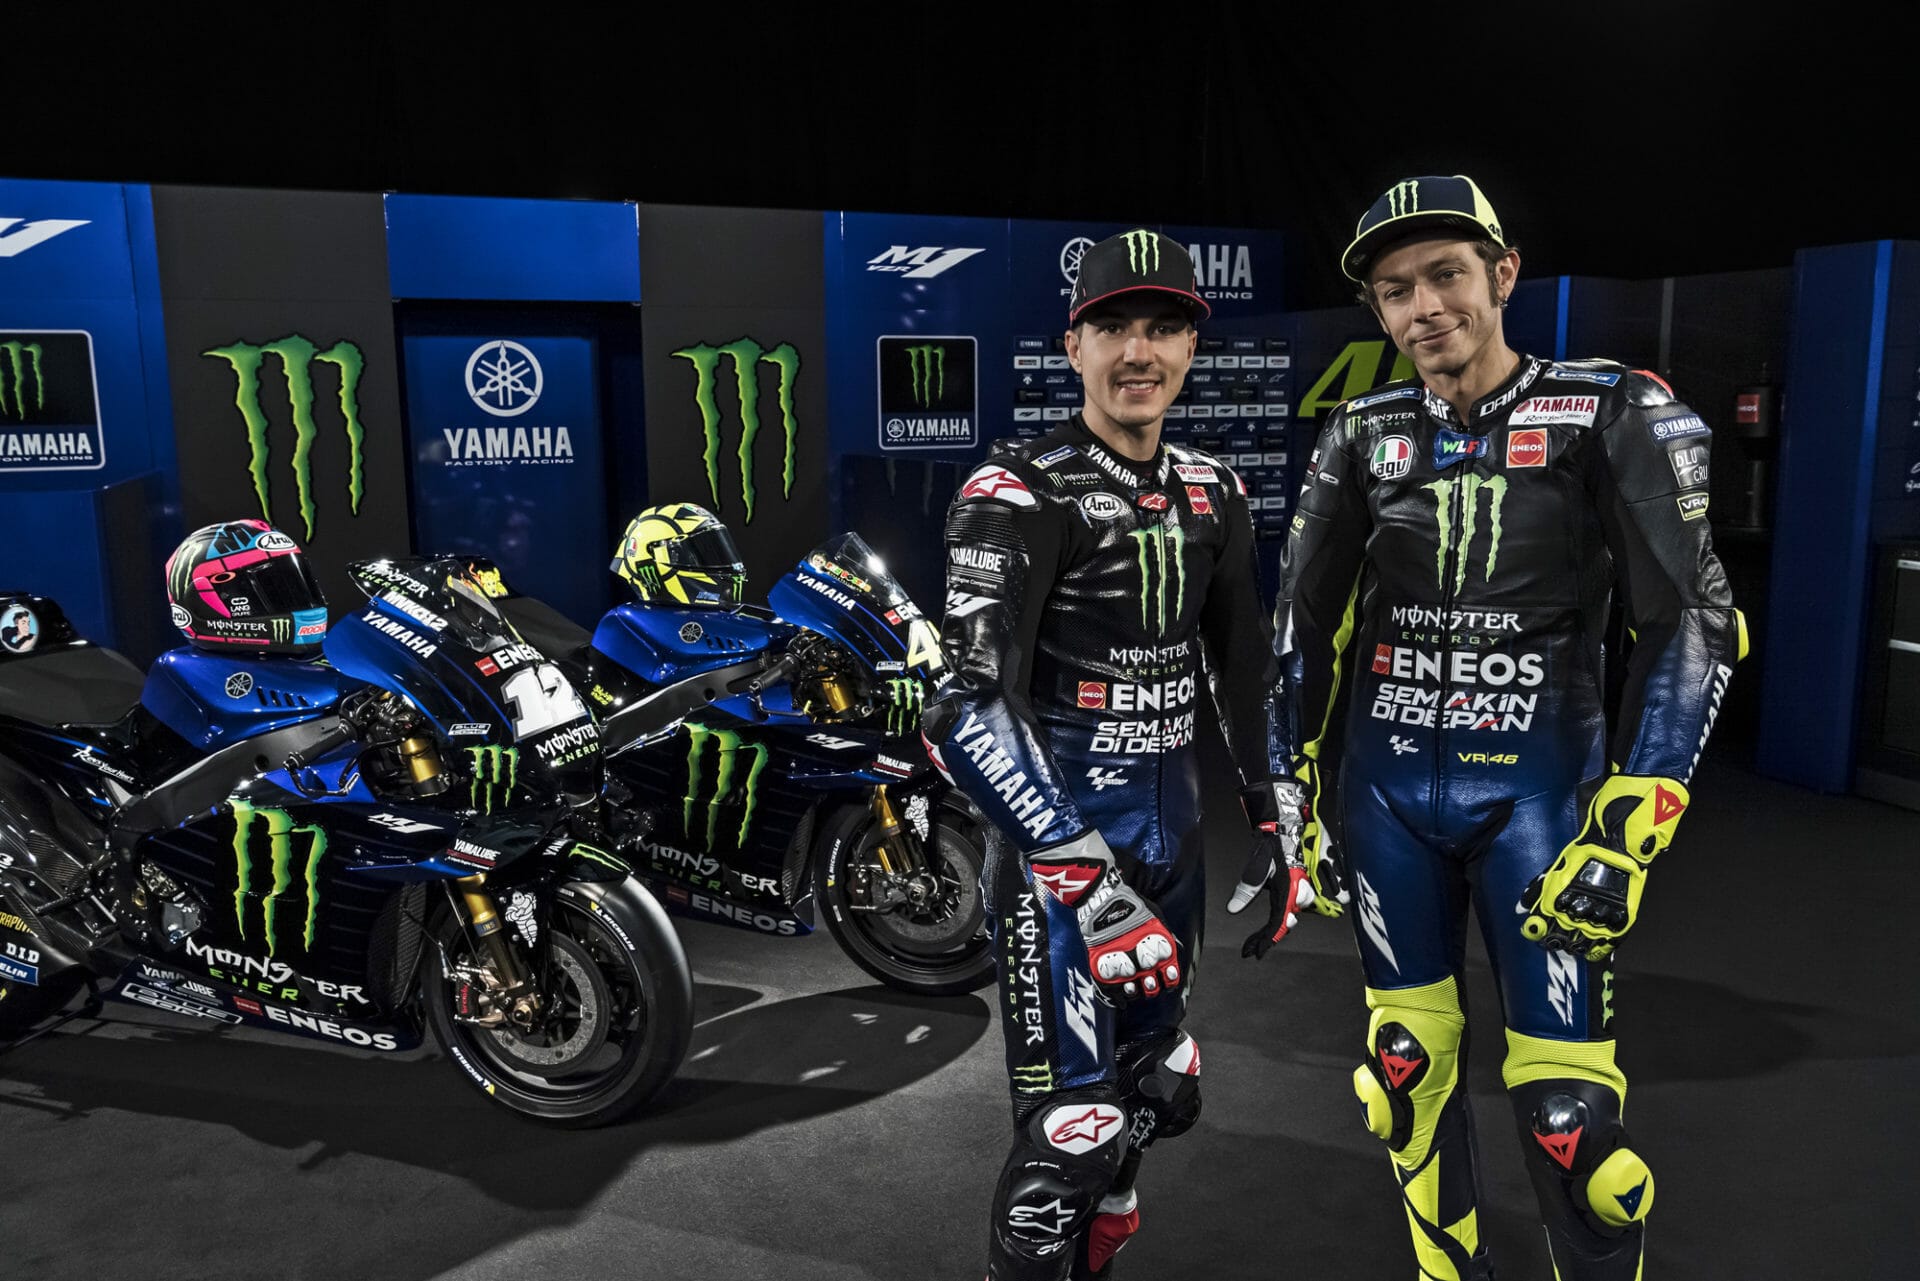 MotoGP: Maverick Vinales extends contract with Yamaha
- also in the MOTORCYCLE NEWS APP